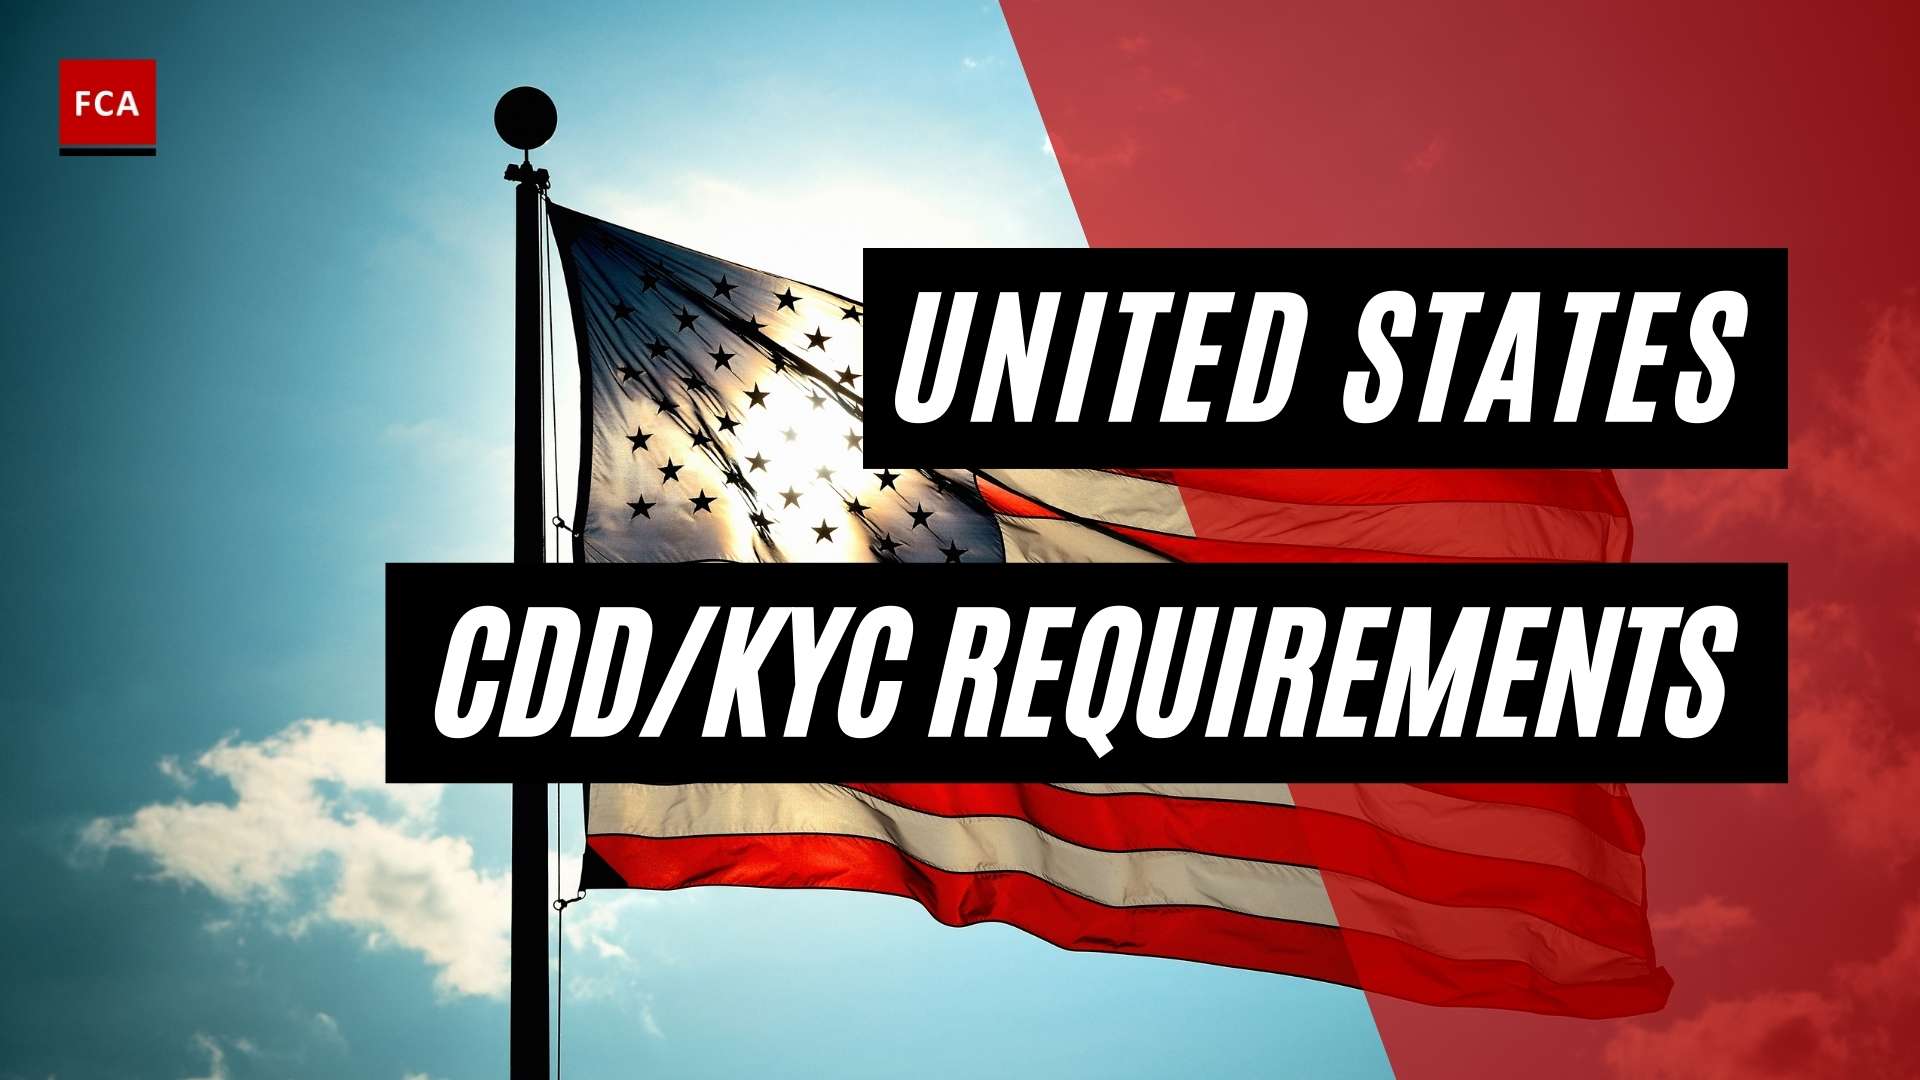 Cdd And Kyc Key Regulation And Requirements In The United States